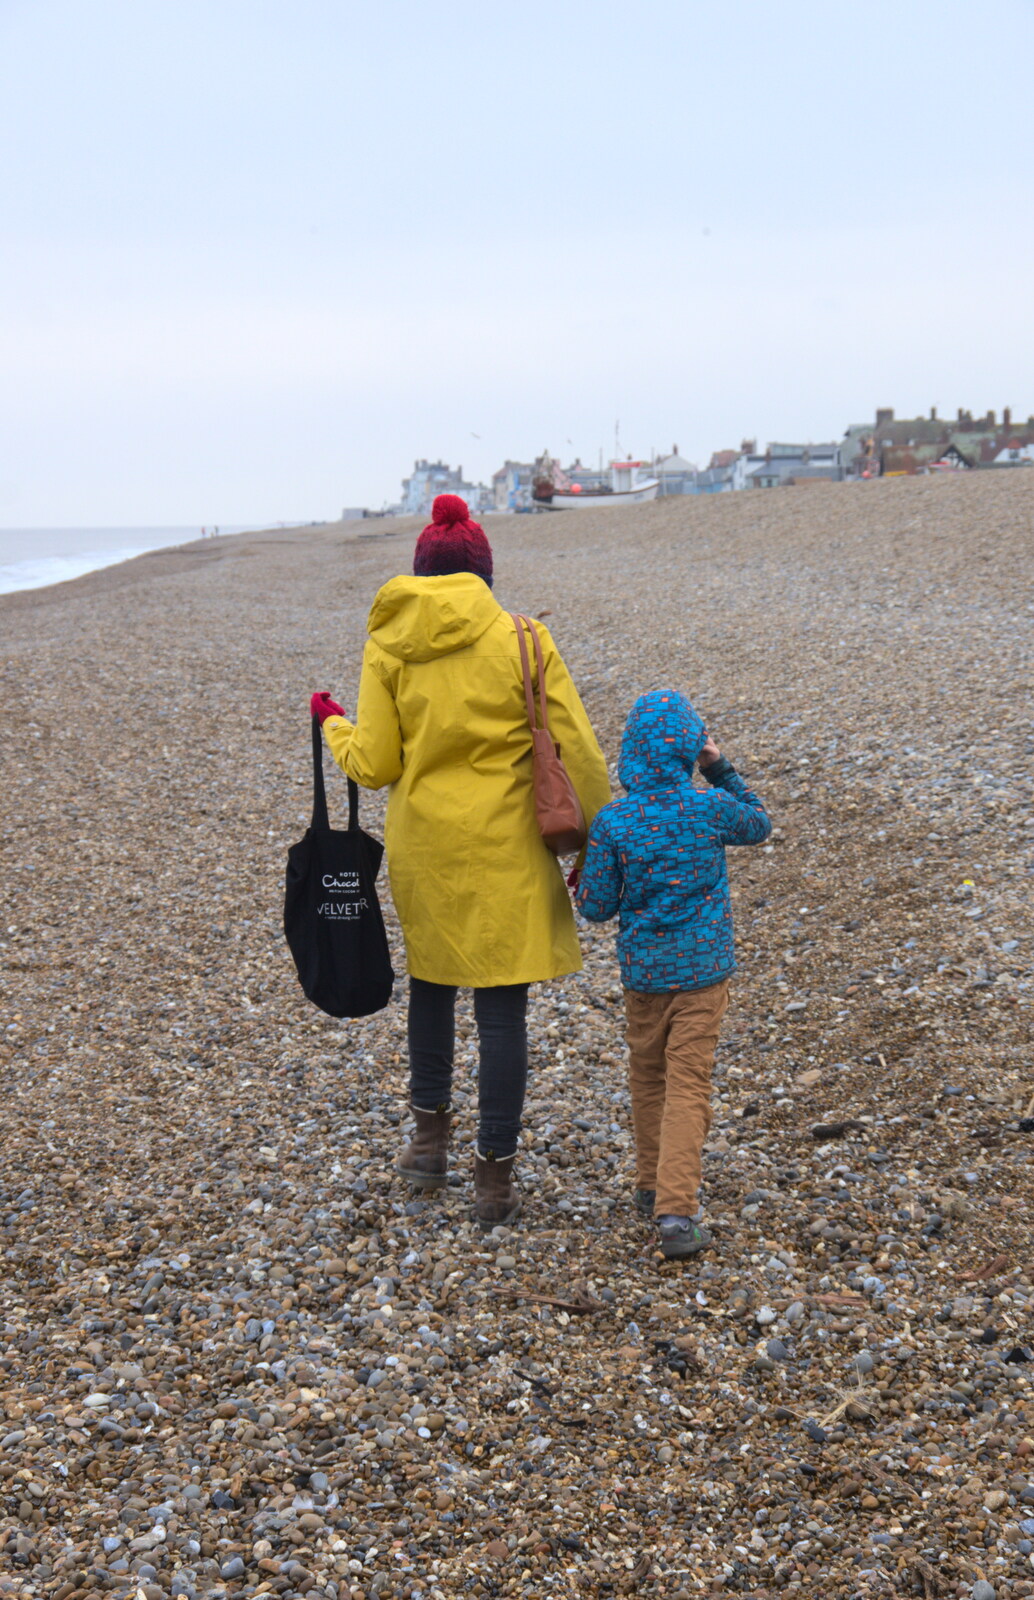 Isobel and Harry walk off from A Postcard from Aldeburgh, Suffolk - 6th January 2019